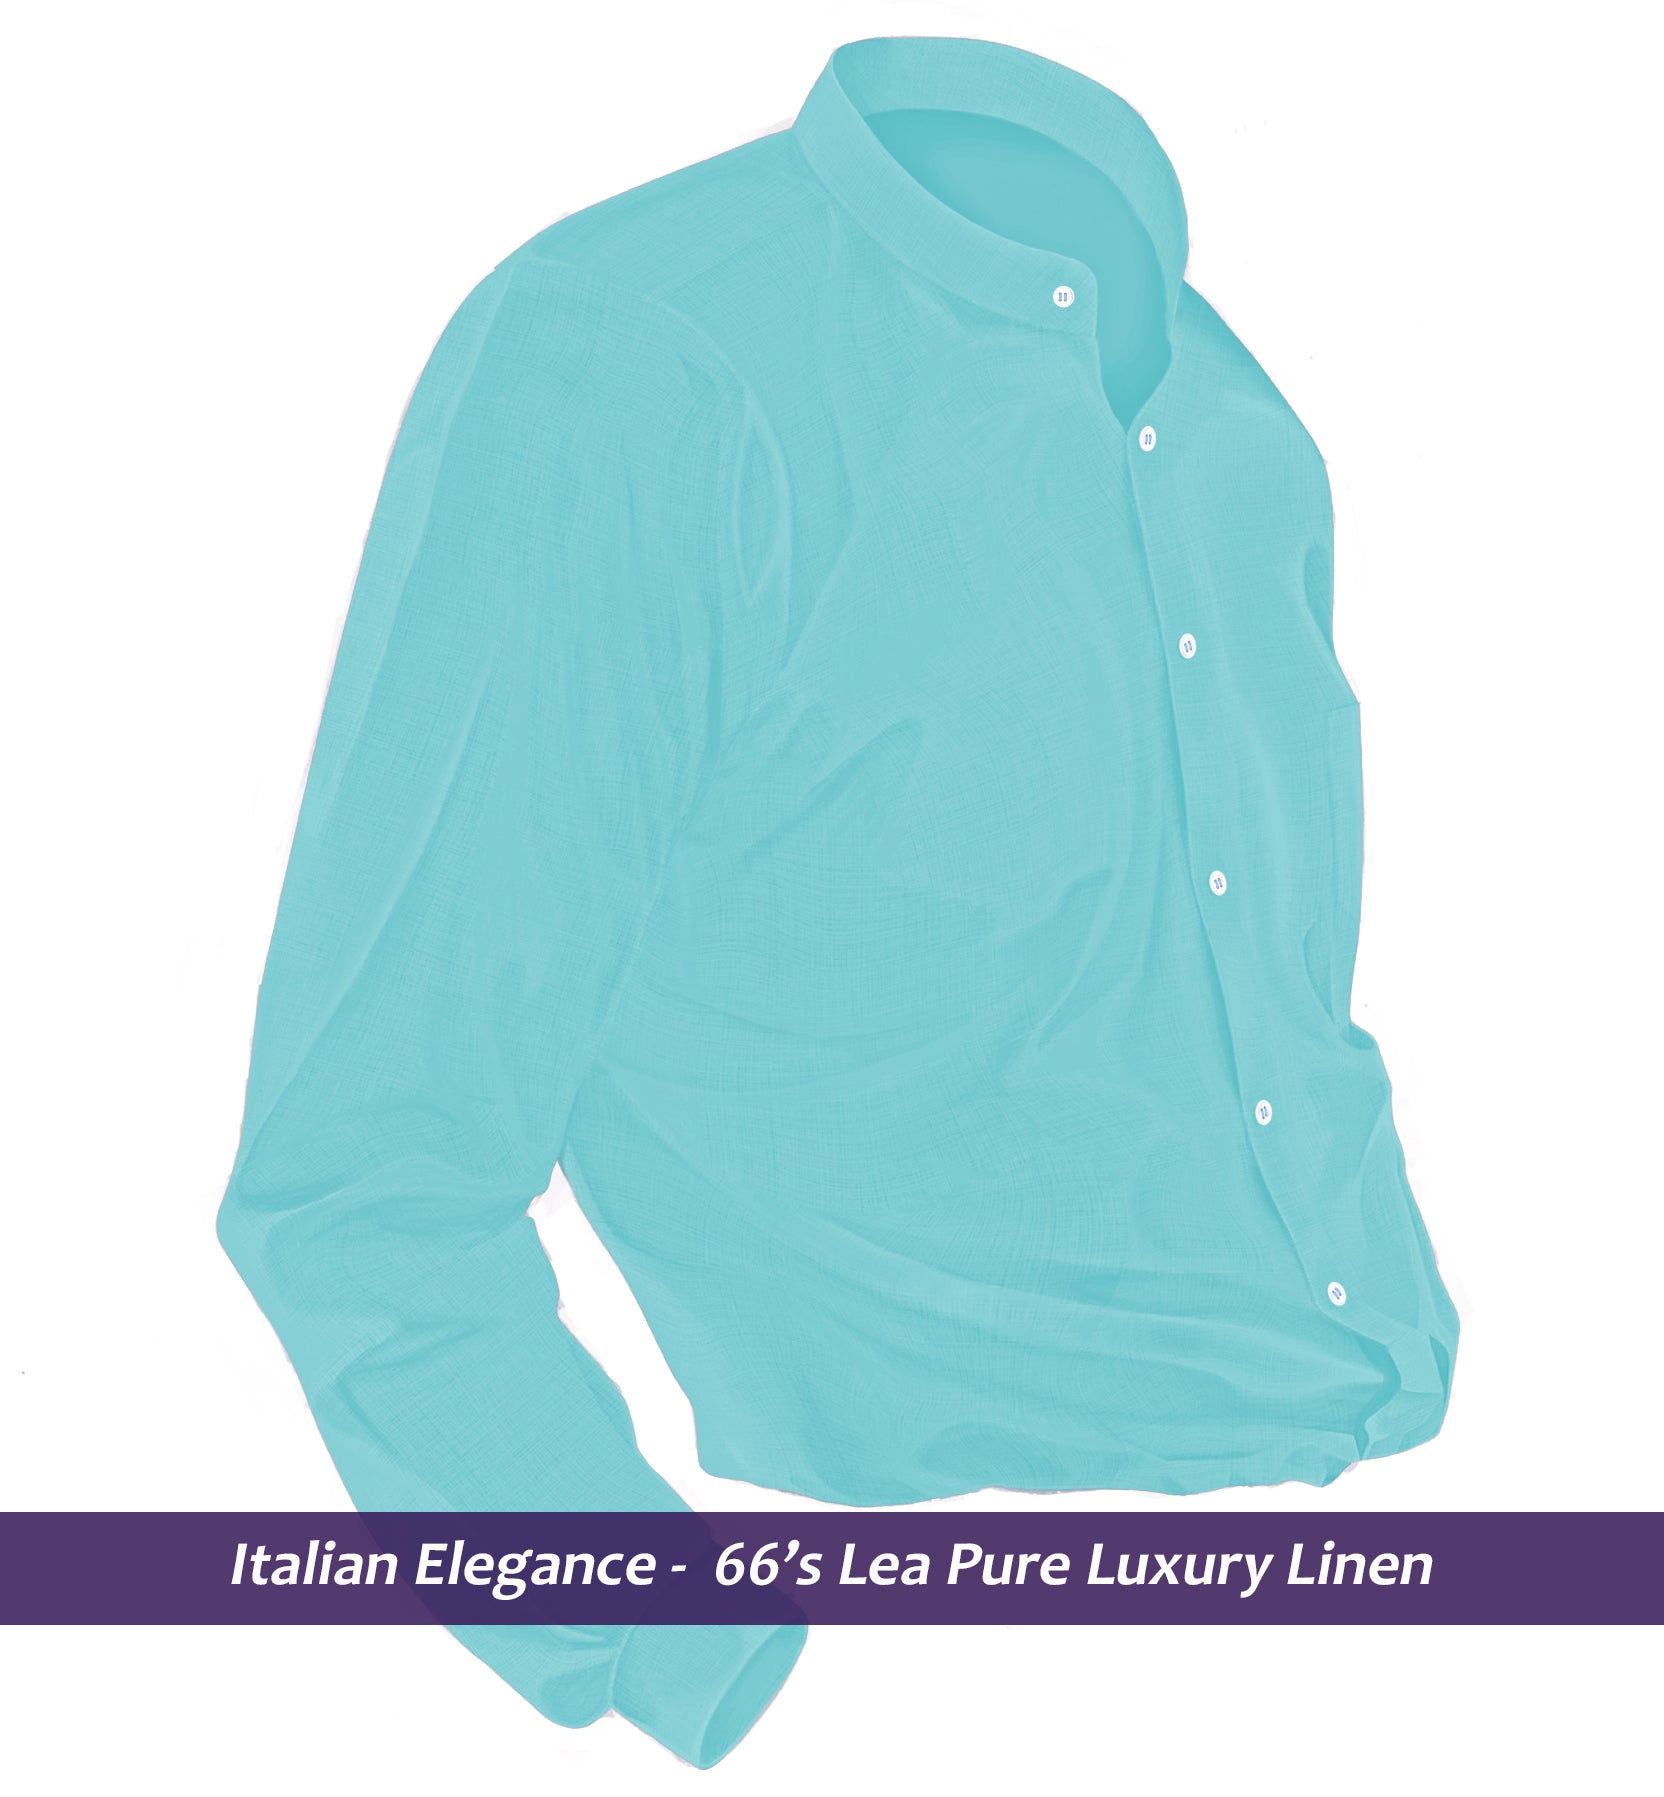 Munich- Turquoise Green Linen- Mandarin Collar- 66's Lea Pure Luxury Linen-Delivery from 1st May